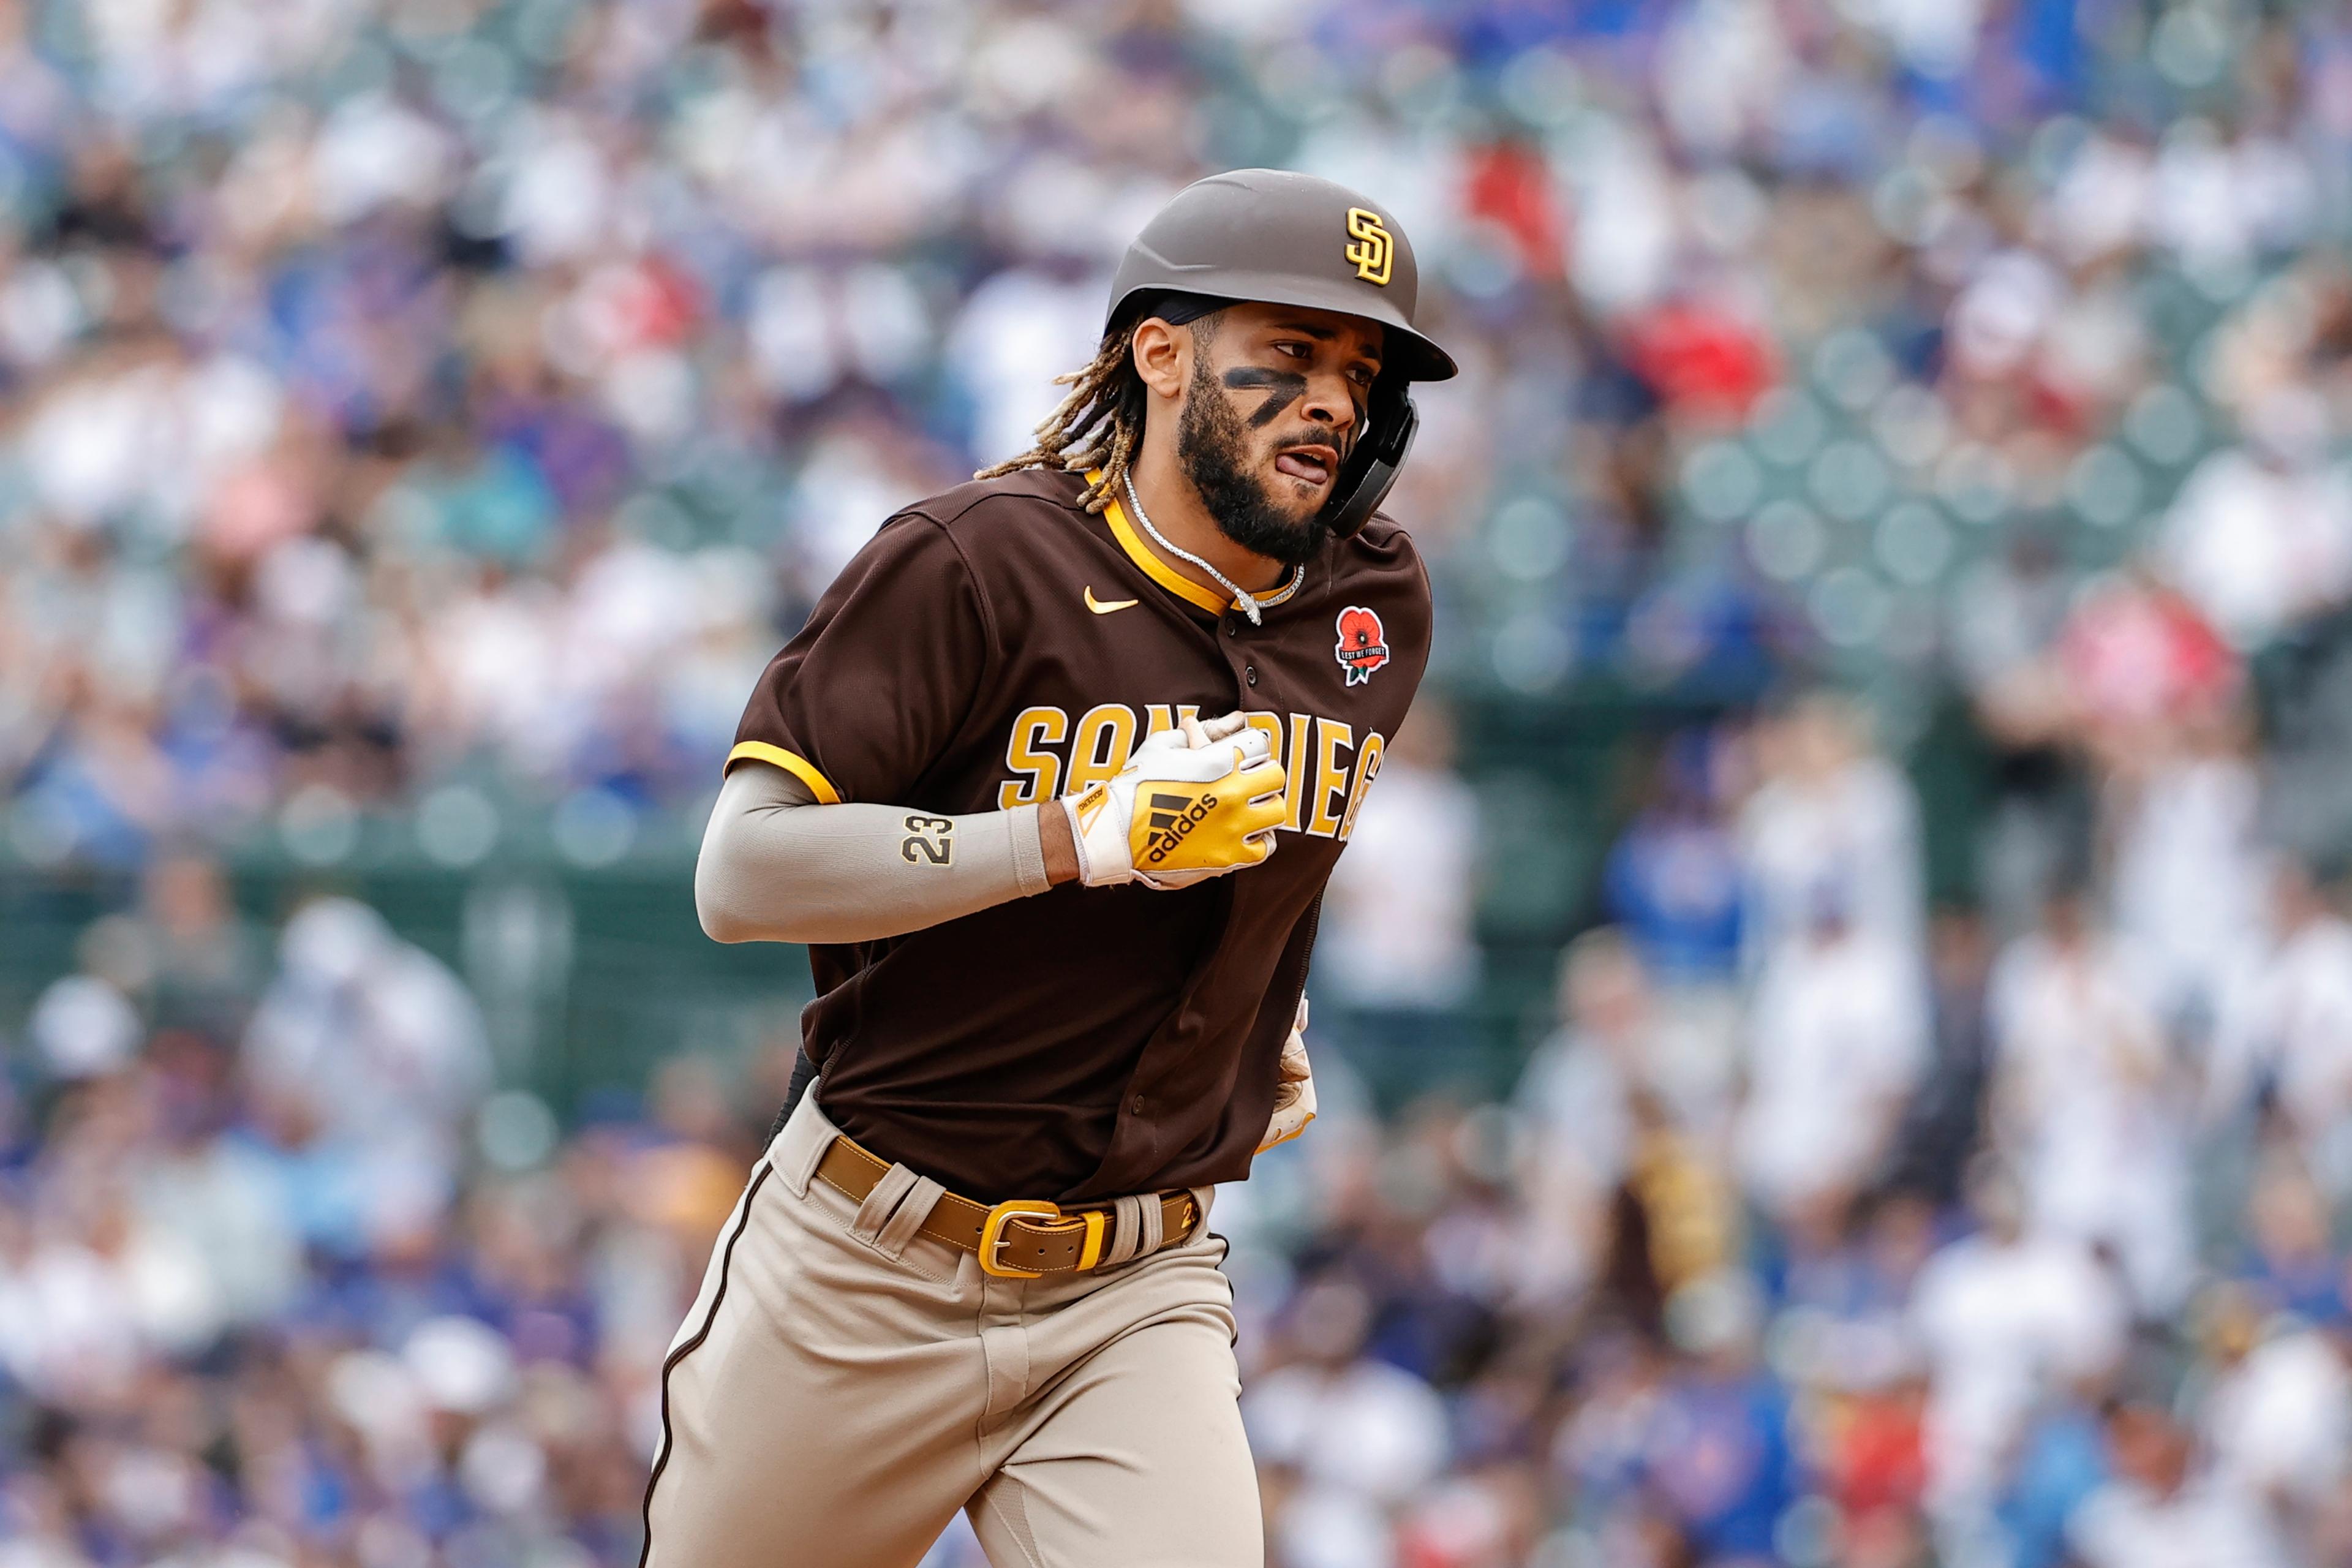 May 31, 2021; Chicago, Illinois, USA; San Diego Padres shortstop Fernando Tatis Jr. (23) rounds the bases after hitting a solo home run against the Chicago Cubs during the sixth inning at Wrigley Field. / Kamil Krzaczynski-USA TODAY Sports